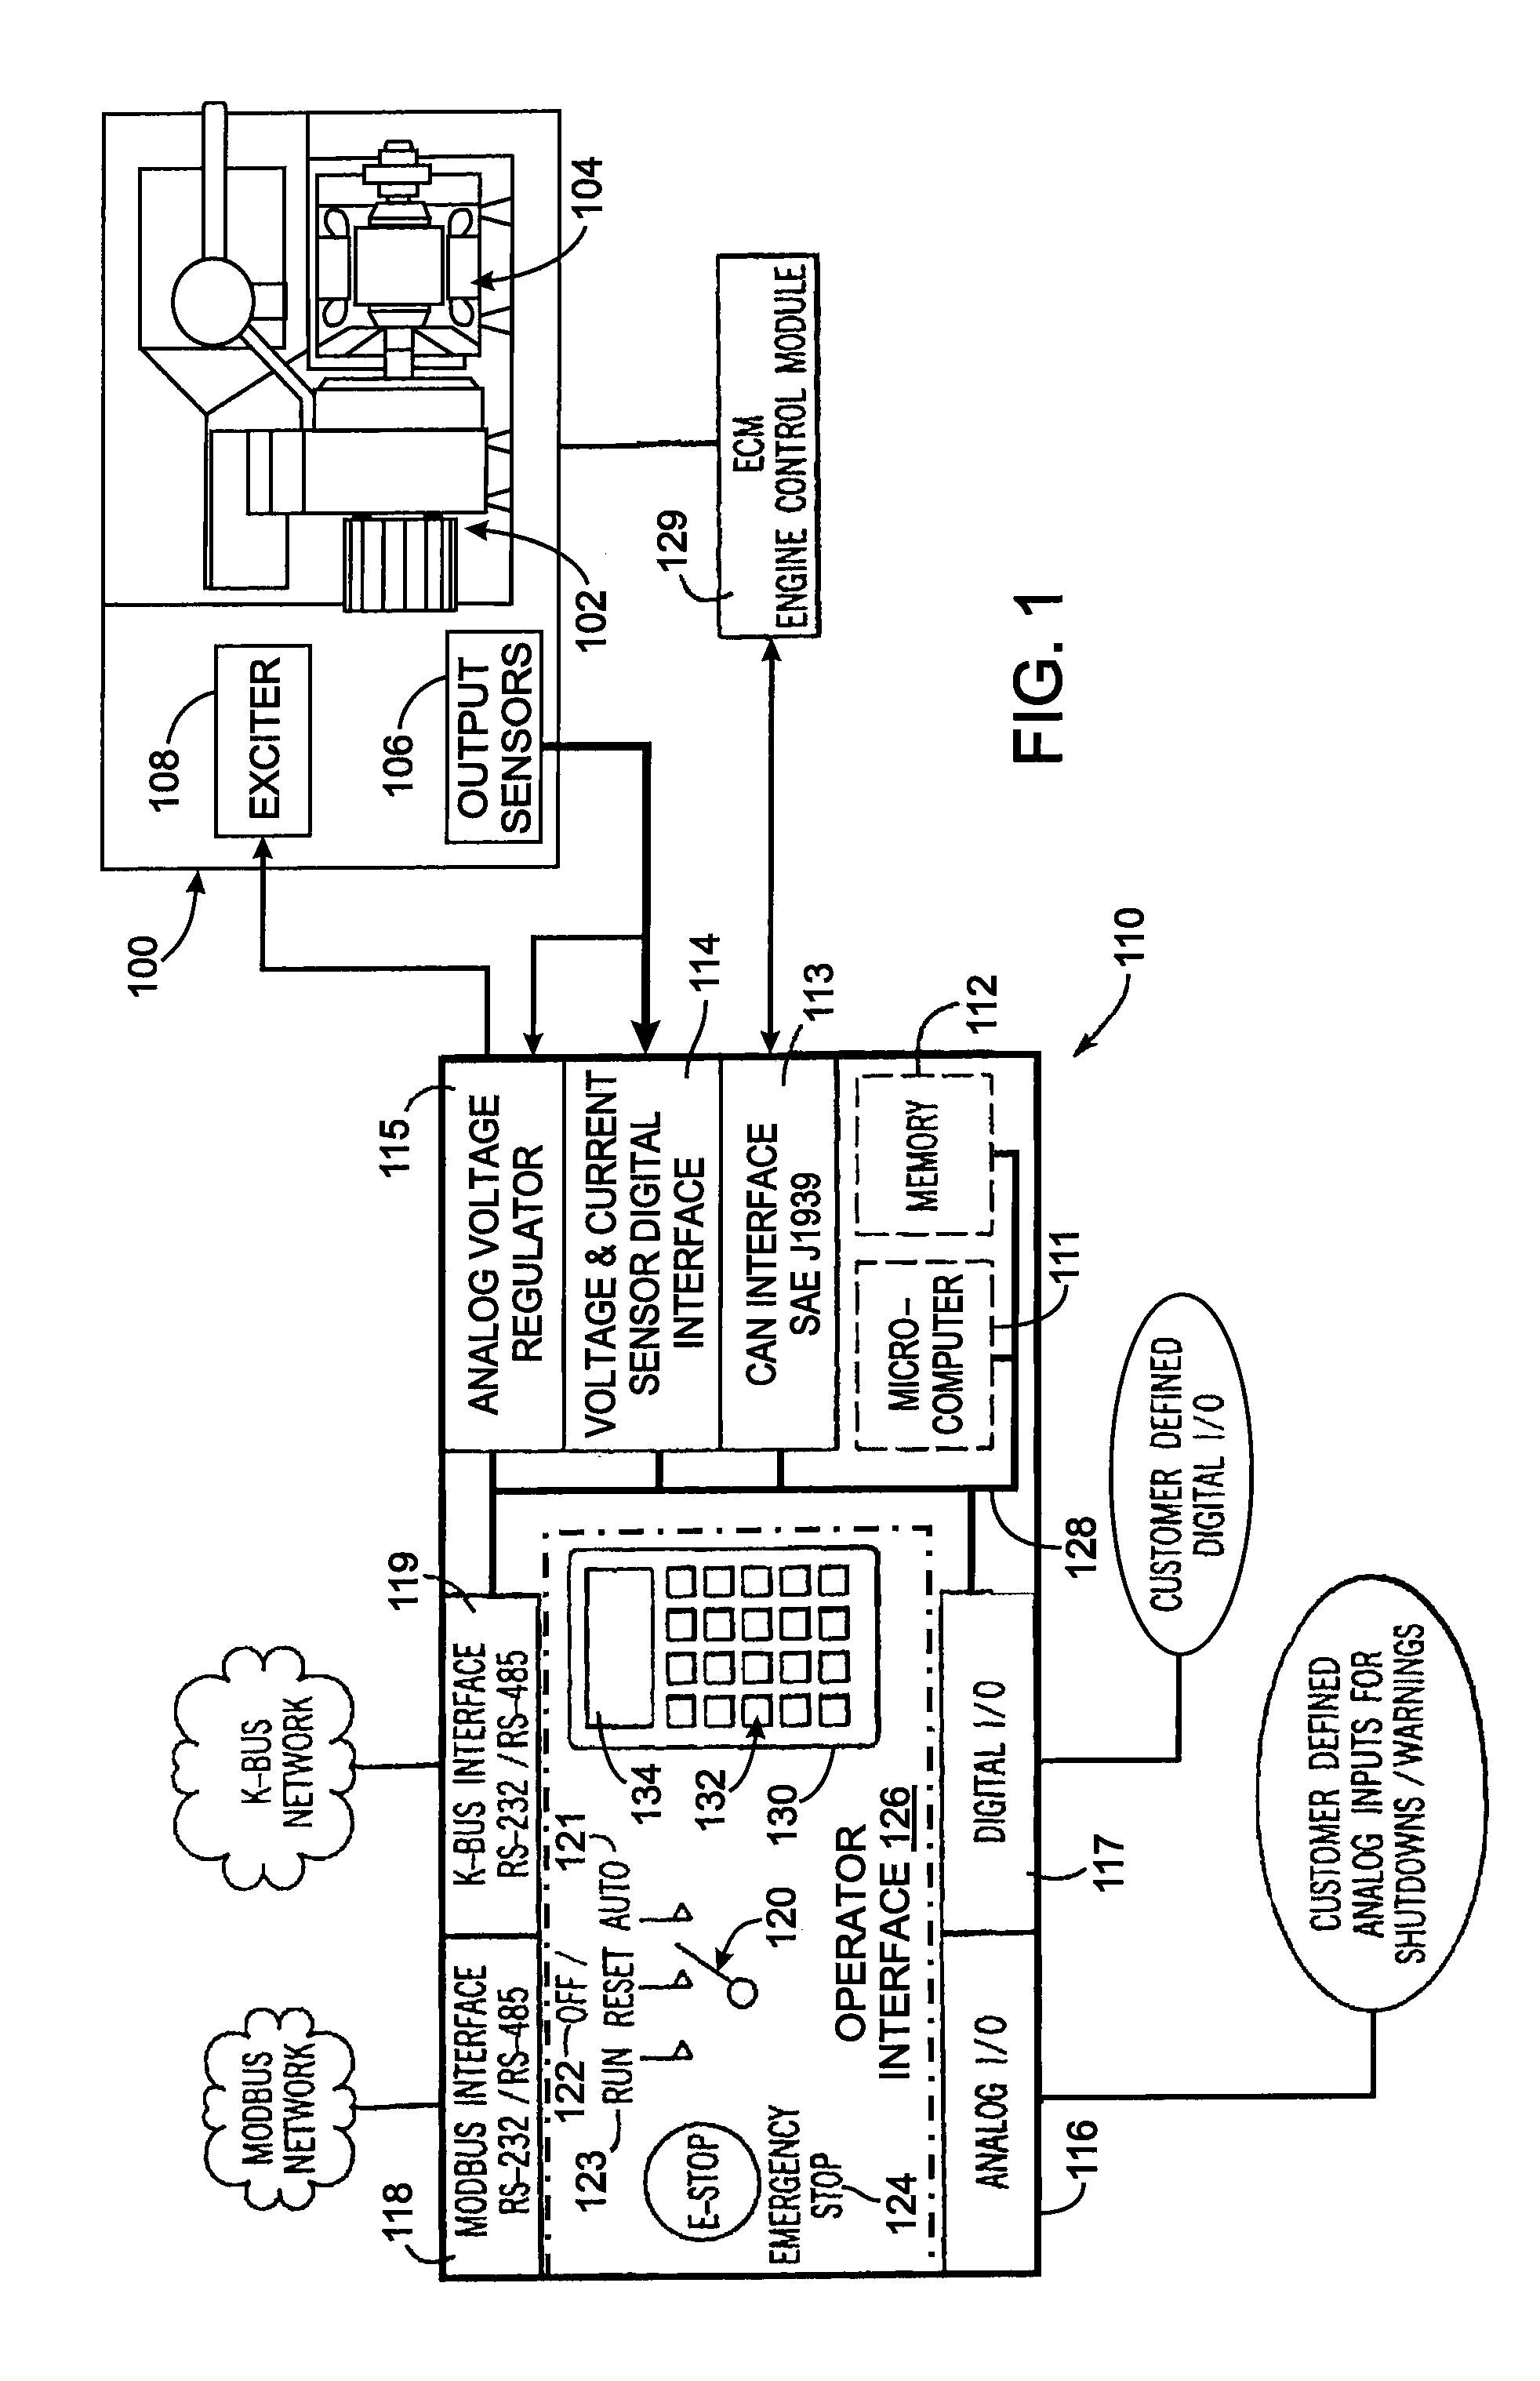 Method and apparatus for regulating excitation of an alternator